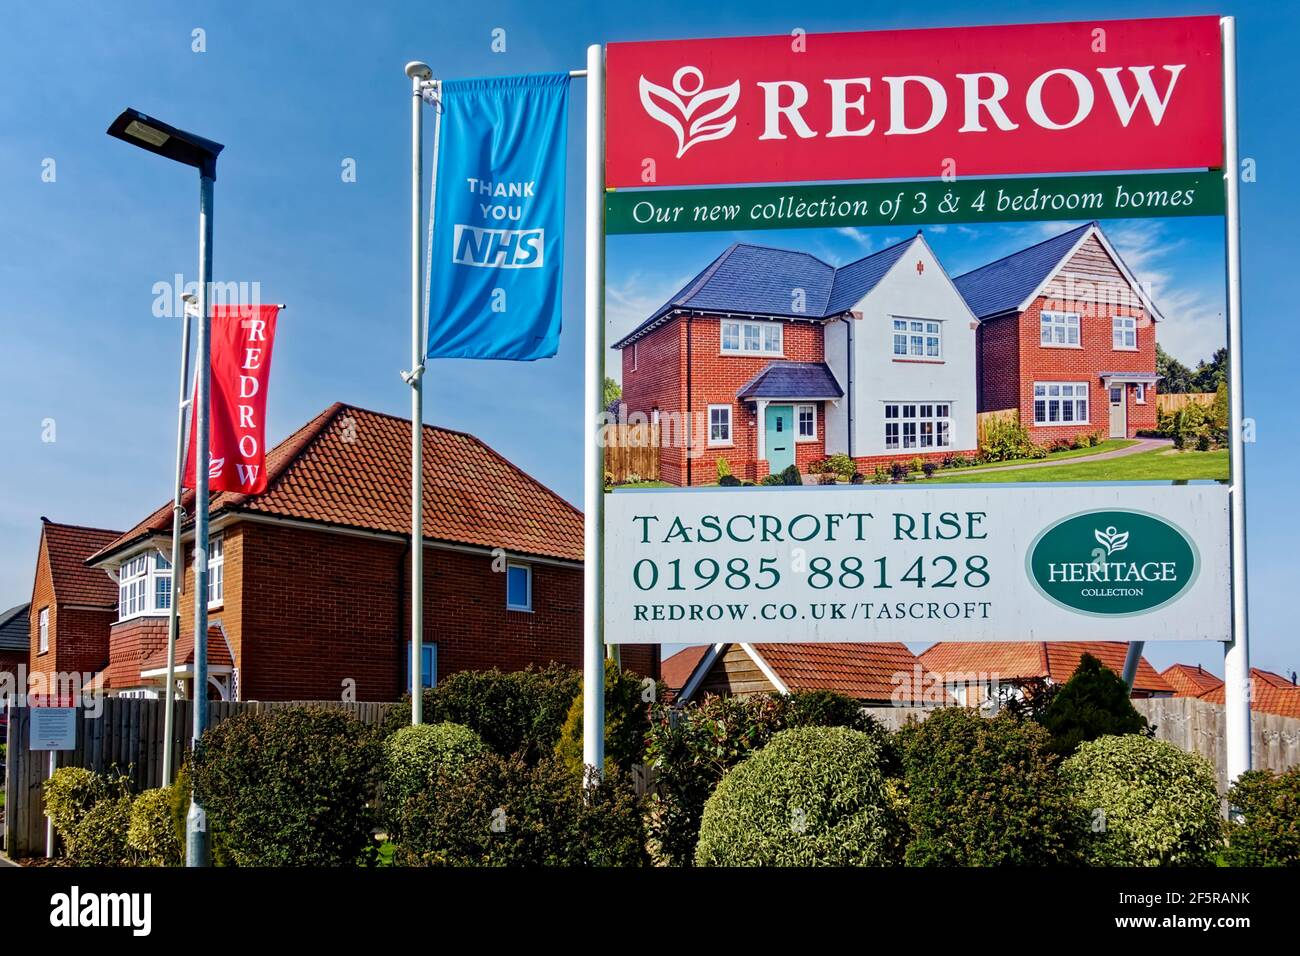 Warminster, Wiltshire, UK - March 9 2021: Redrow Homes Tascroft Rise Housing Development Sign in Warminster, Wiltshire, England, UK Stock Photo